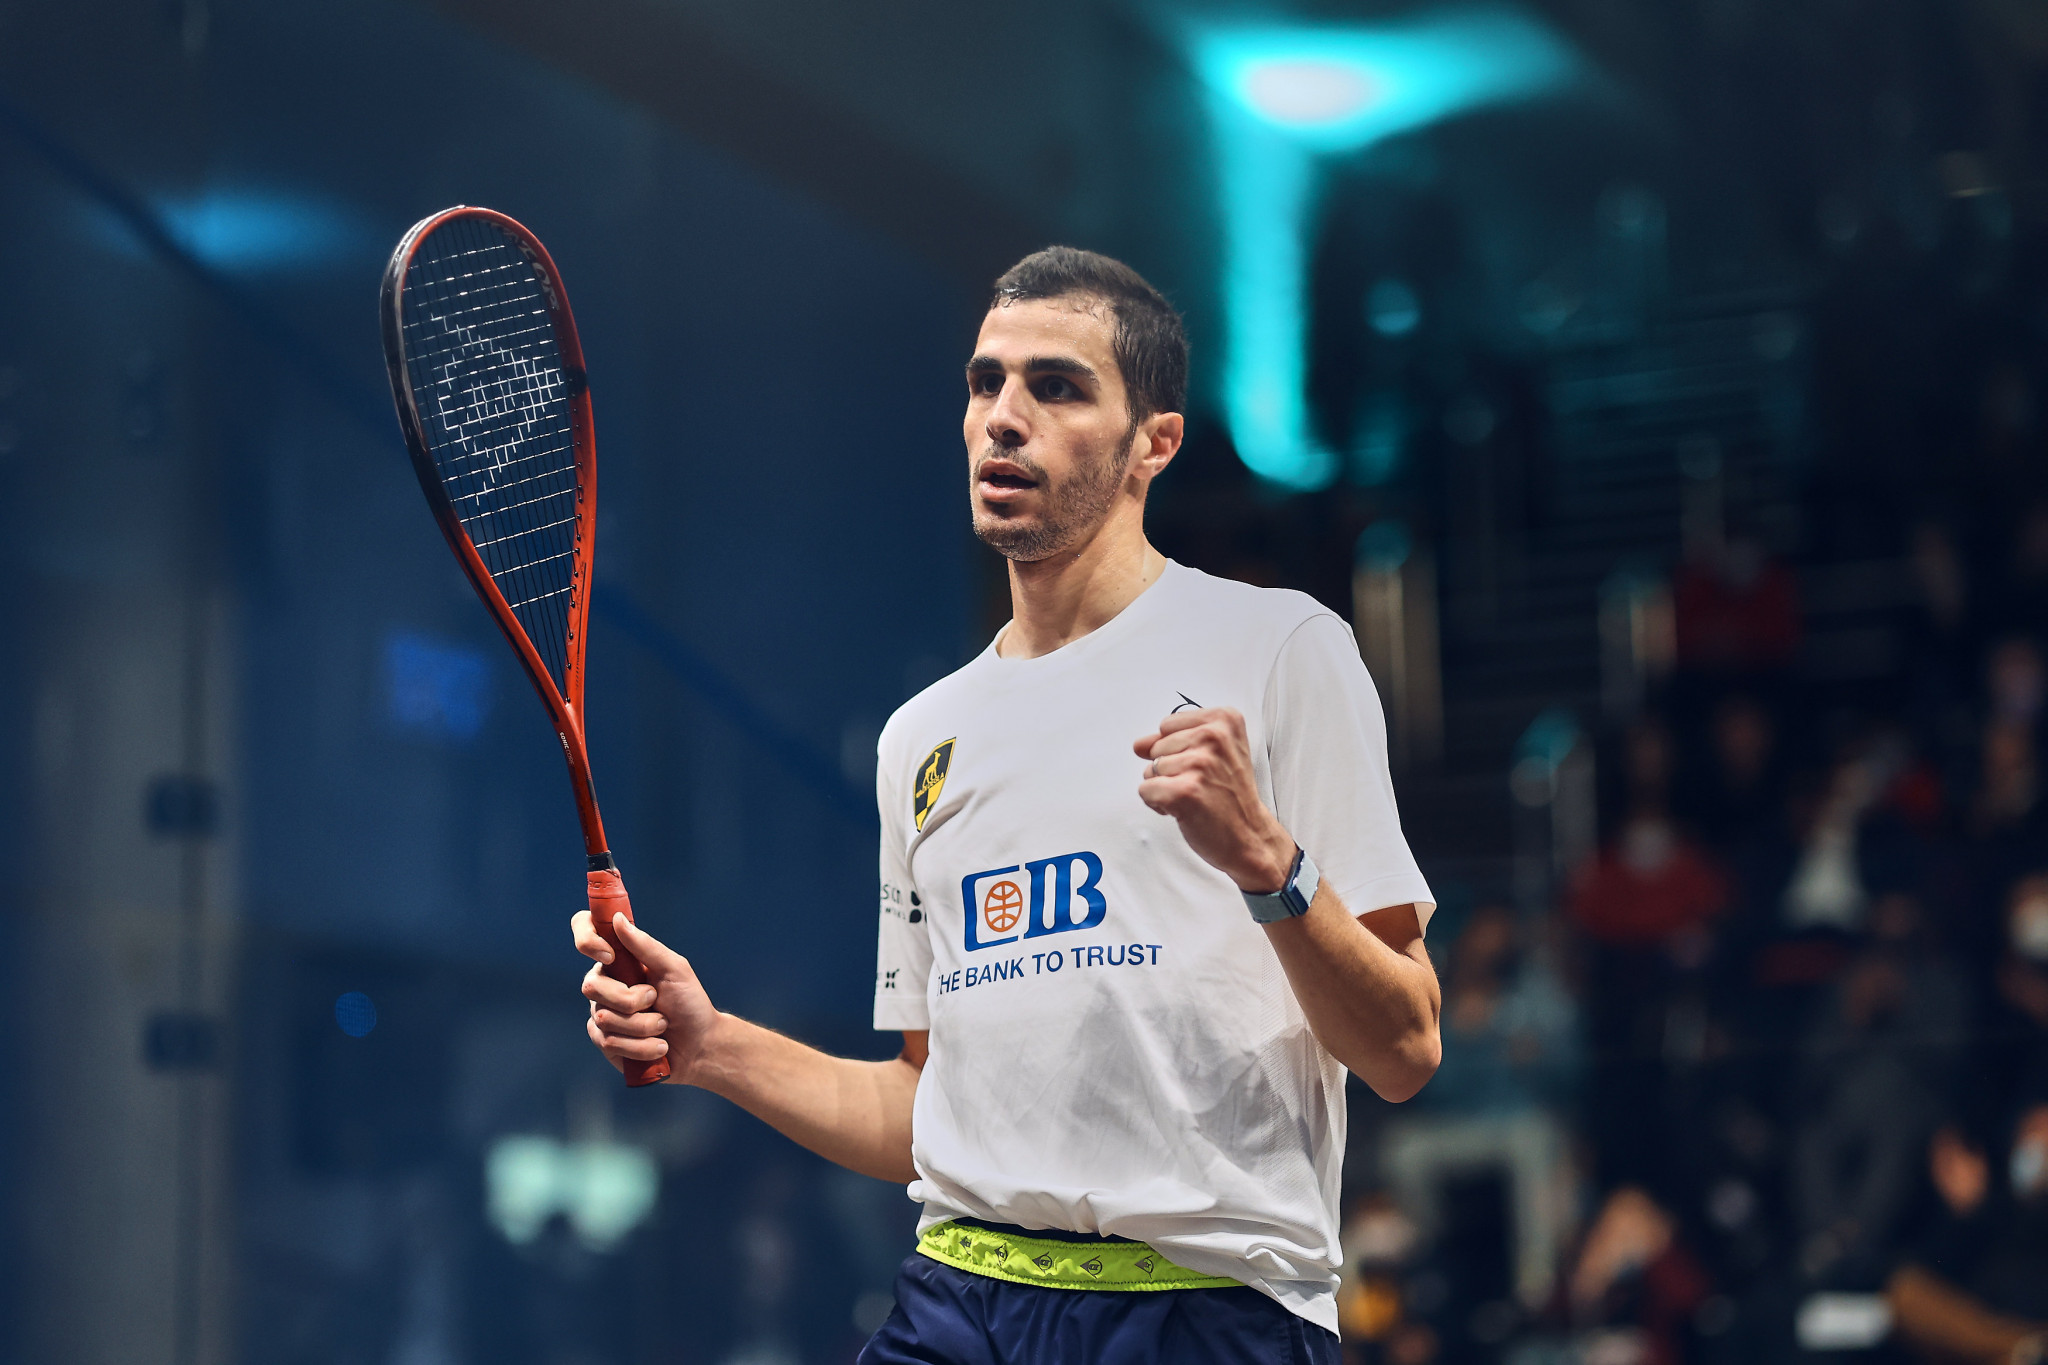 Ali Farag of Egypt, the current men's world number one, is set to defend his title at the Windy City Open in Chicago ©PSA